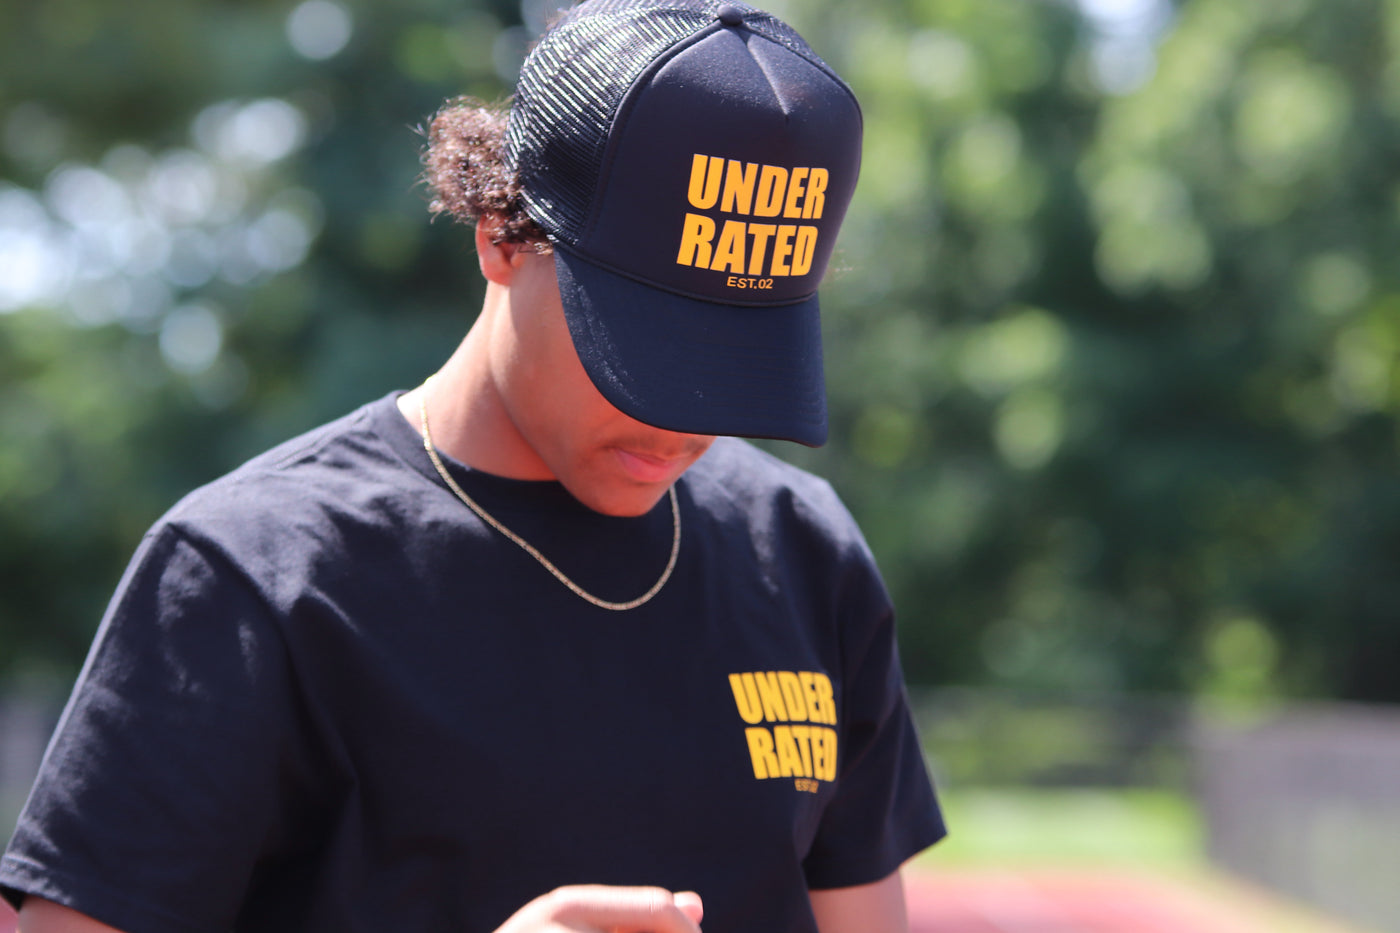 BLACK UNDERRATED TRUCKER HAT WITH YELLOW FONT